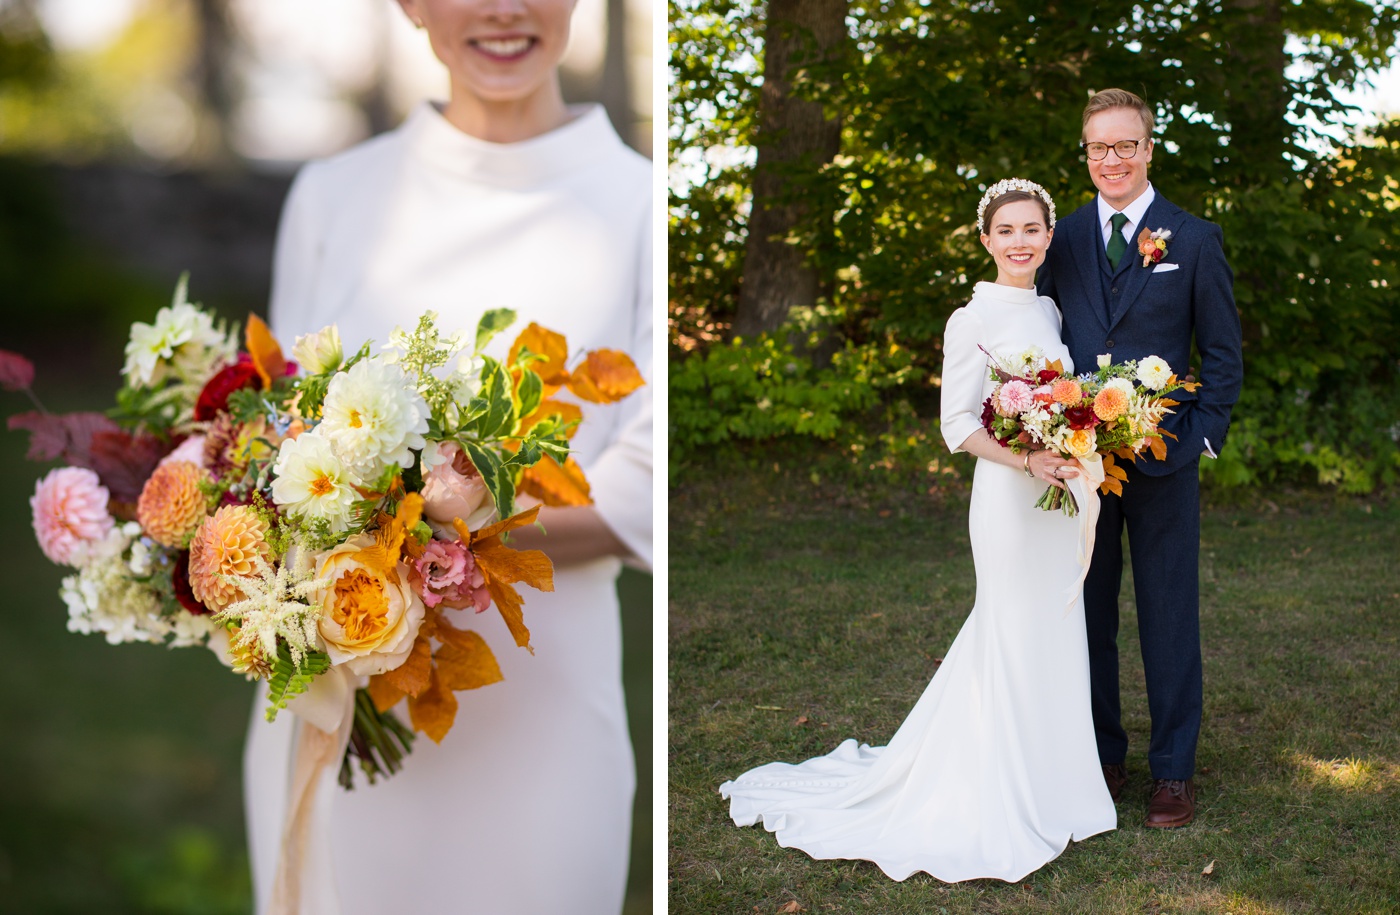 A bridal bouquet filled with orange and white dahlias for a fall wedding